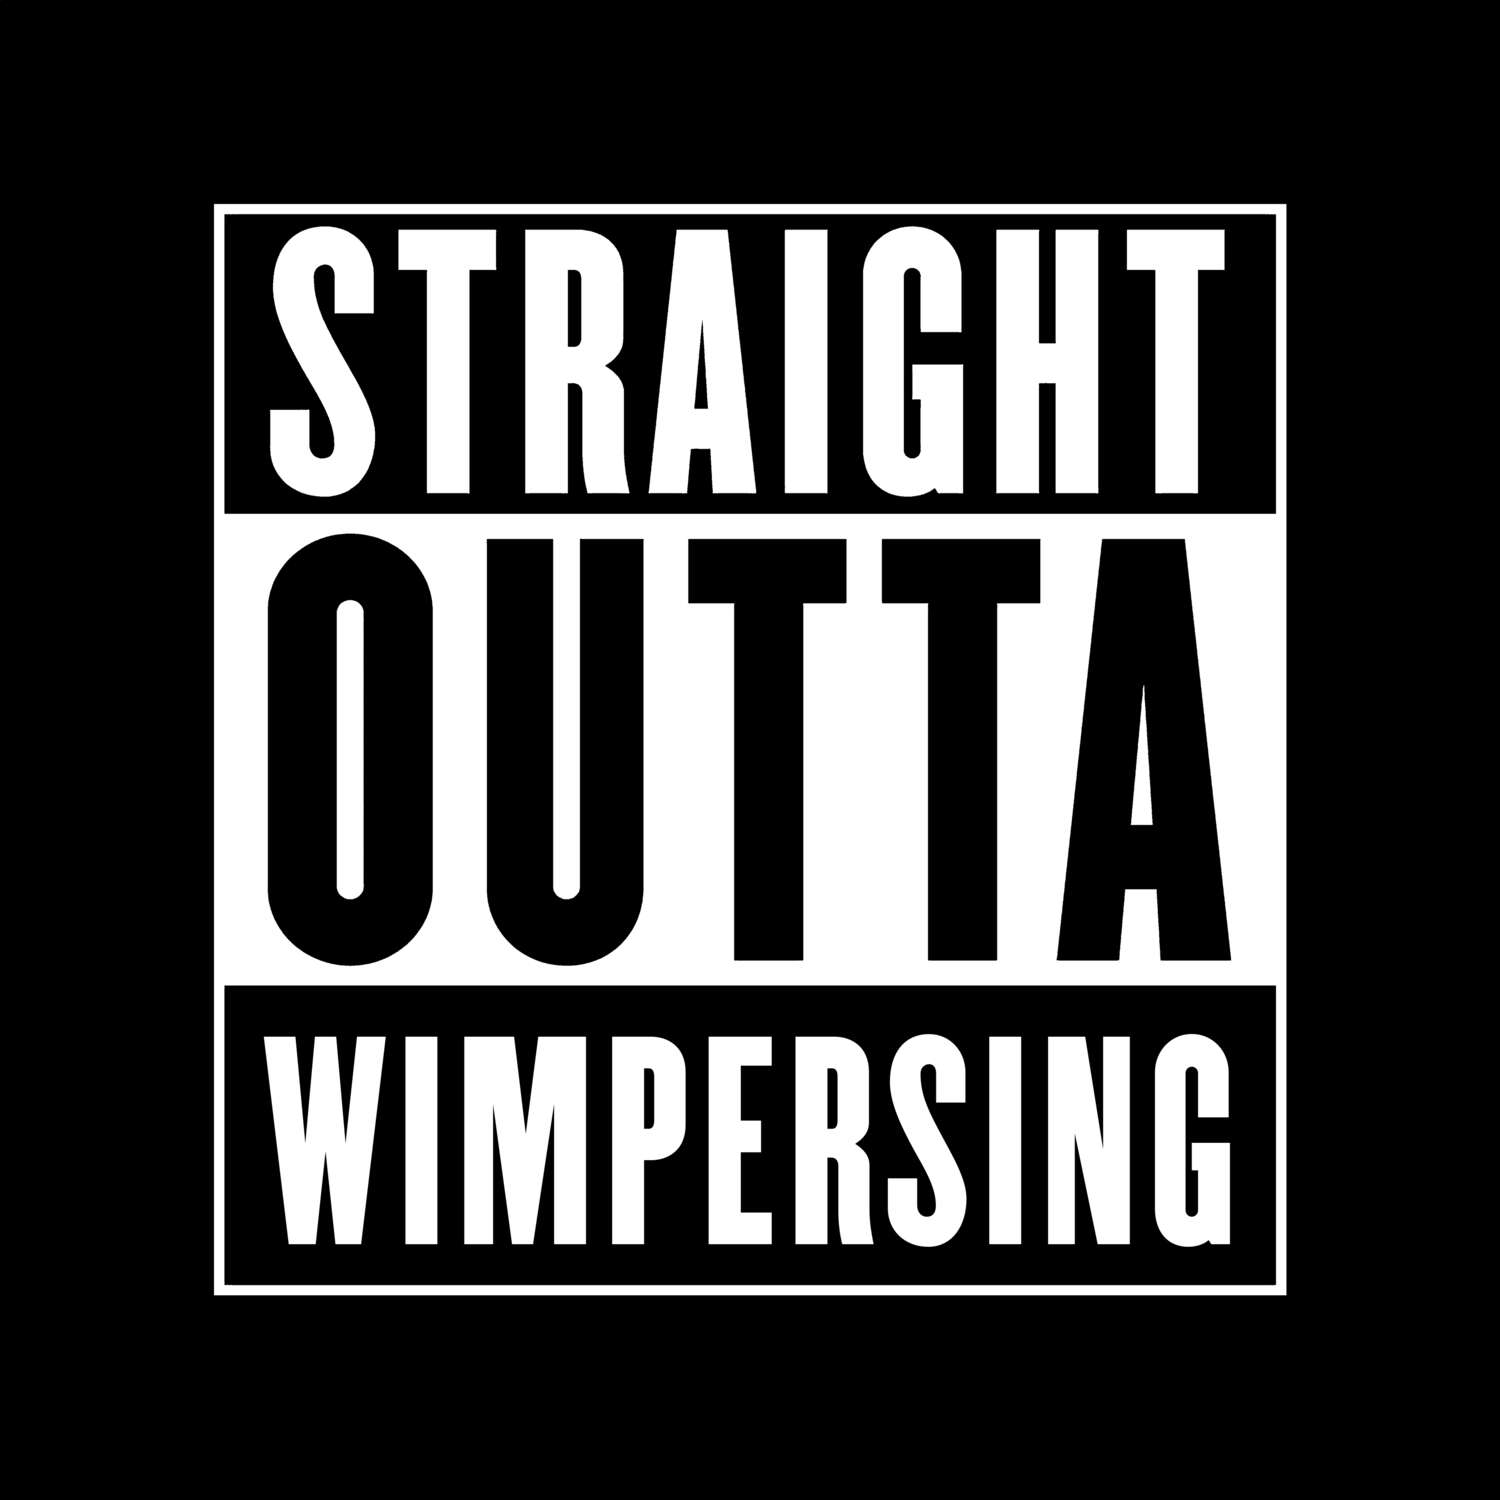 Wimpersing T-Shirt »Straight Outta«